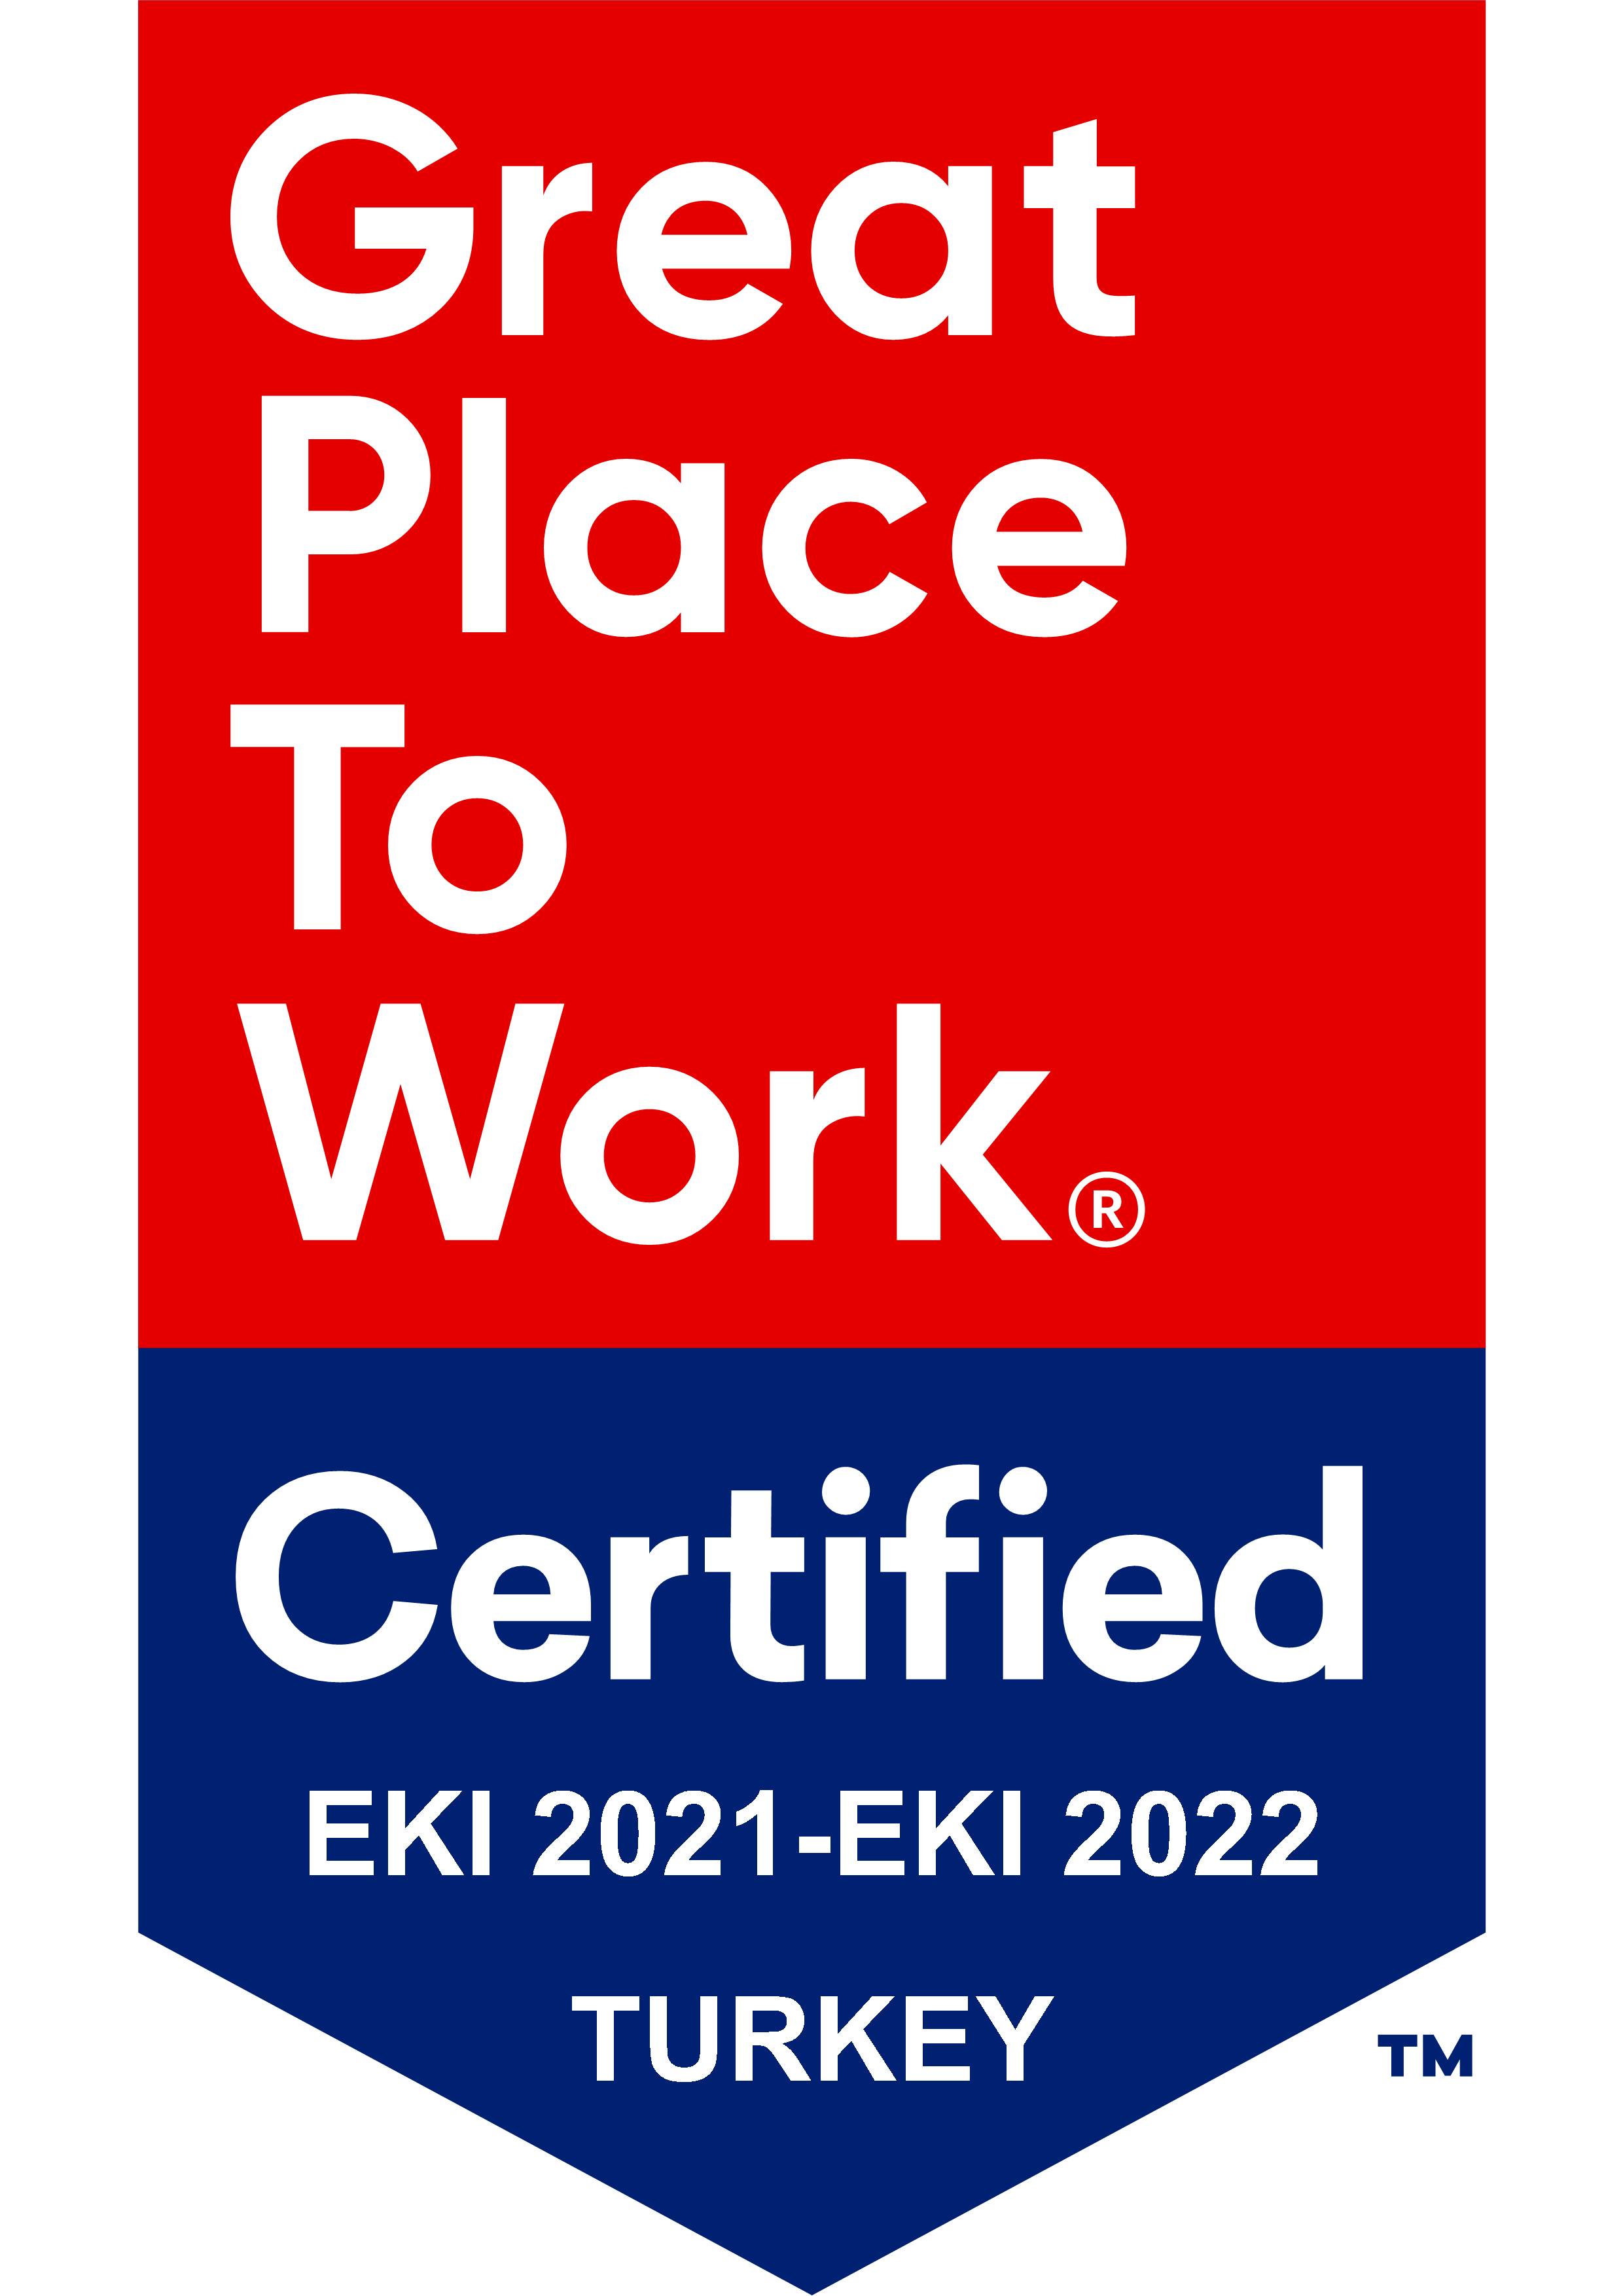 Great Place To Work Certification